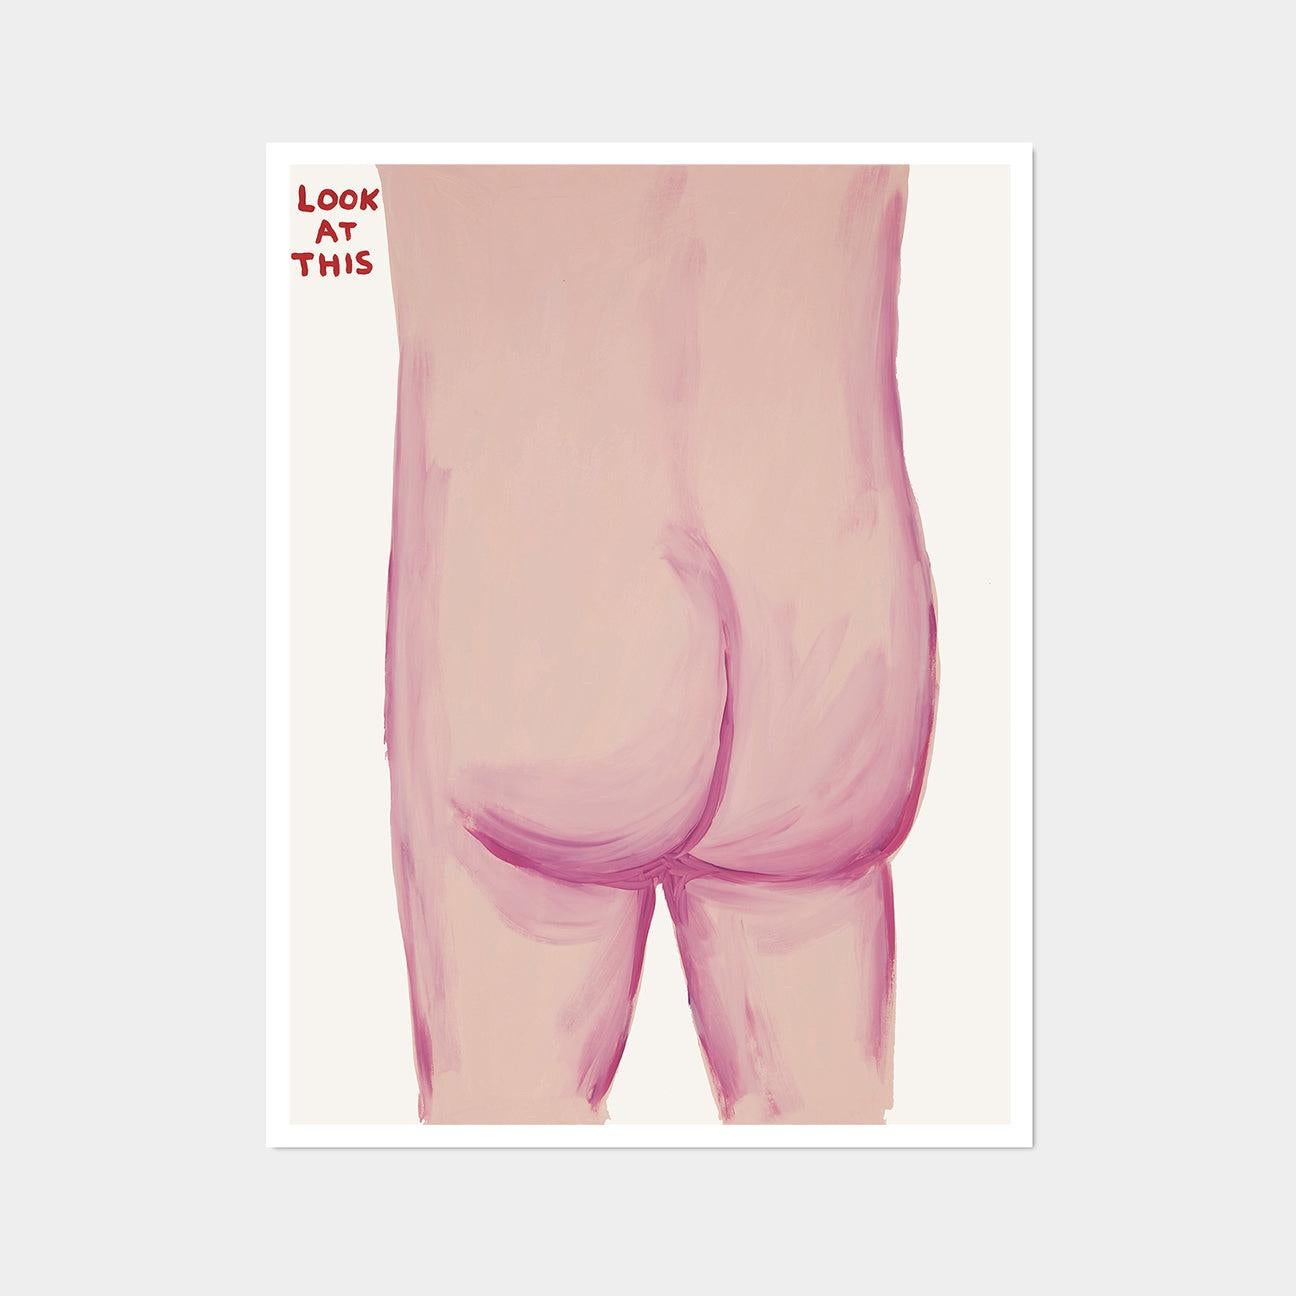 David Shrigley, Look At This, 2020

Off-set lithograph
Unframed
60 x 80 cm (23.62 x 31.5 inches) 
Printed on 200g Munken Lynx paper by Narayana Press in Denmark 

This print is based on the original acrylic on paper work by Shrigley. Please note